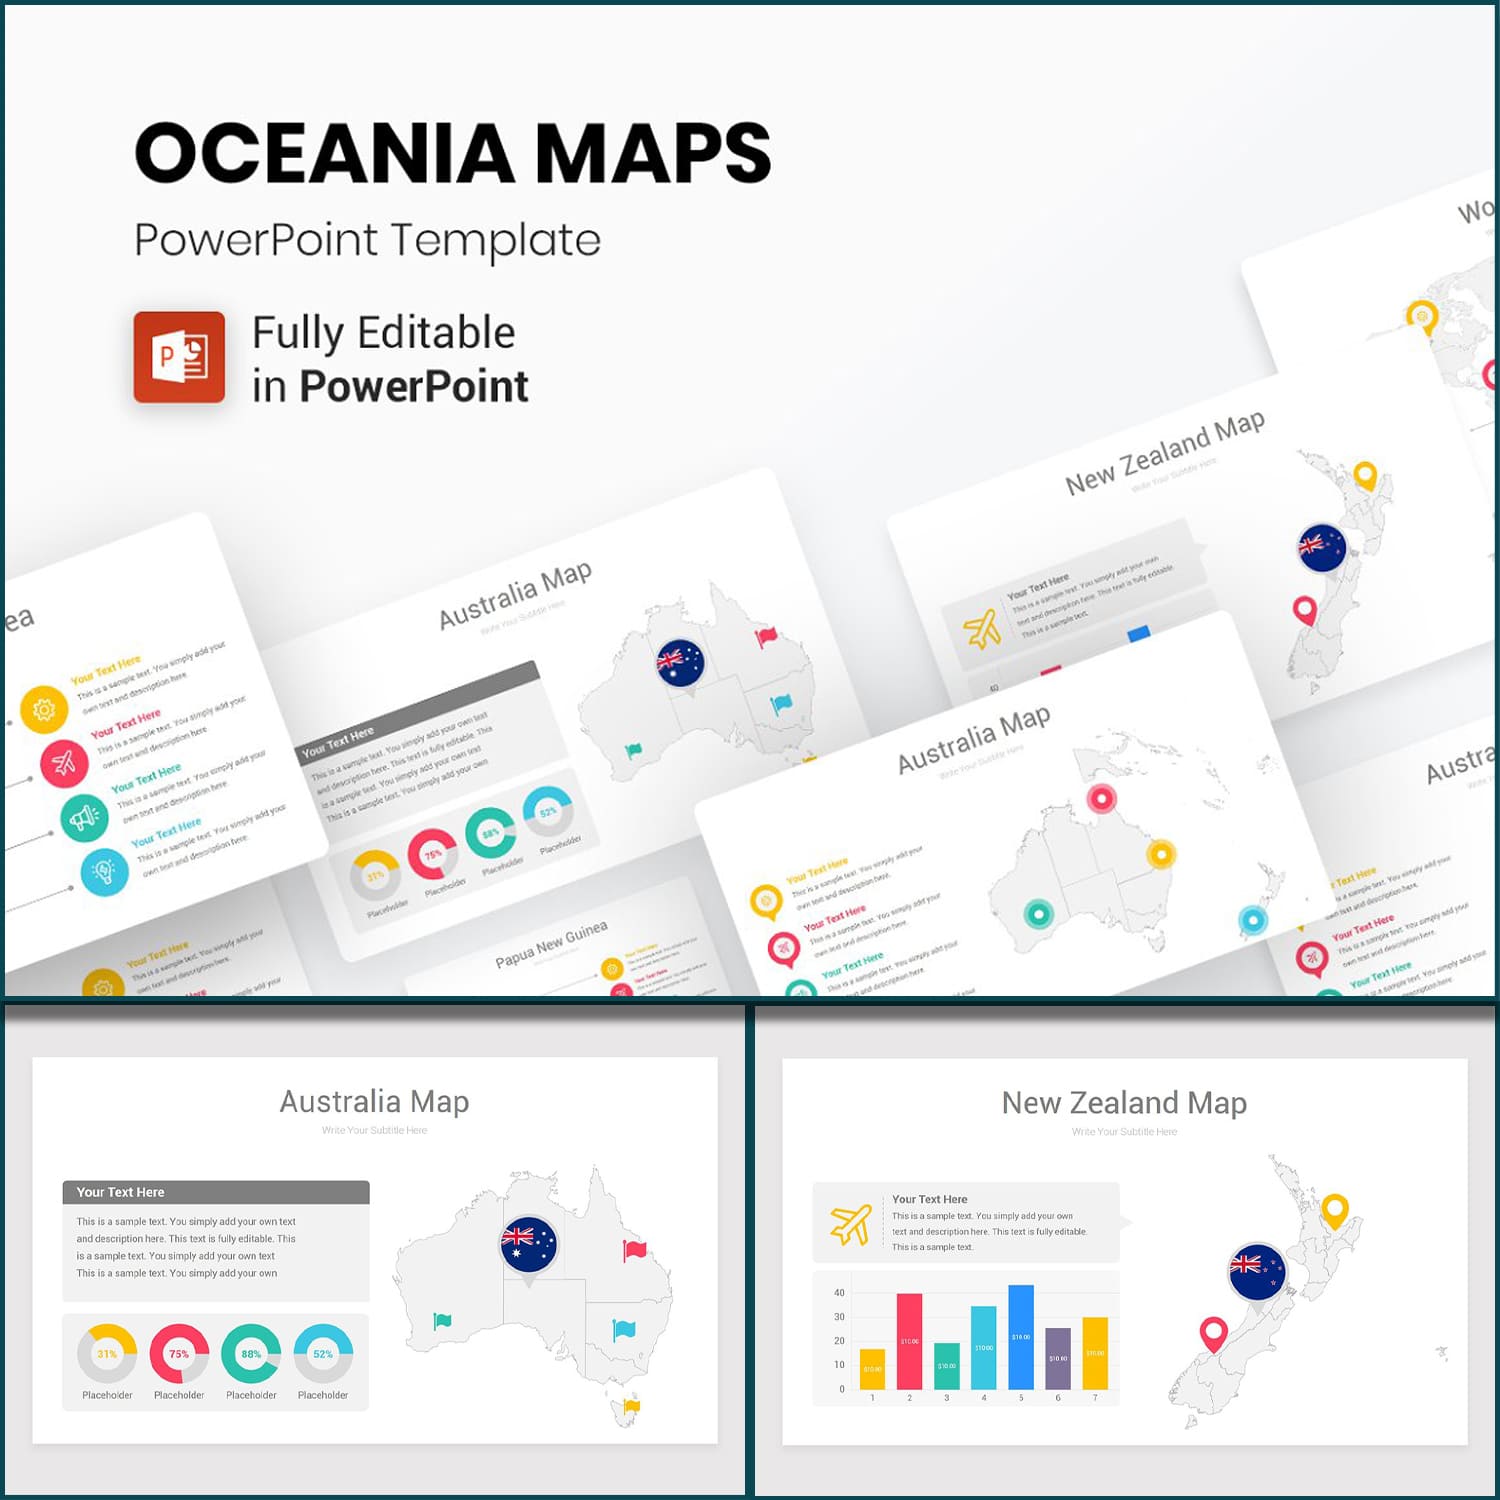 Oceania Maps PowerPoint Template cover image.